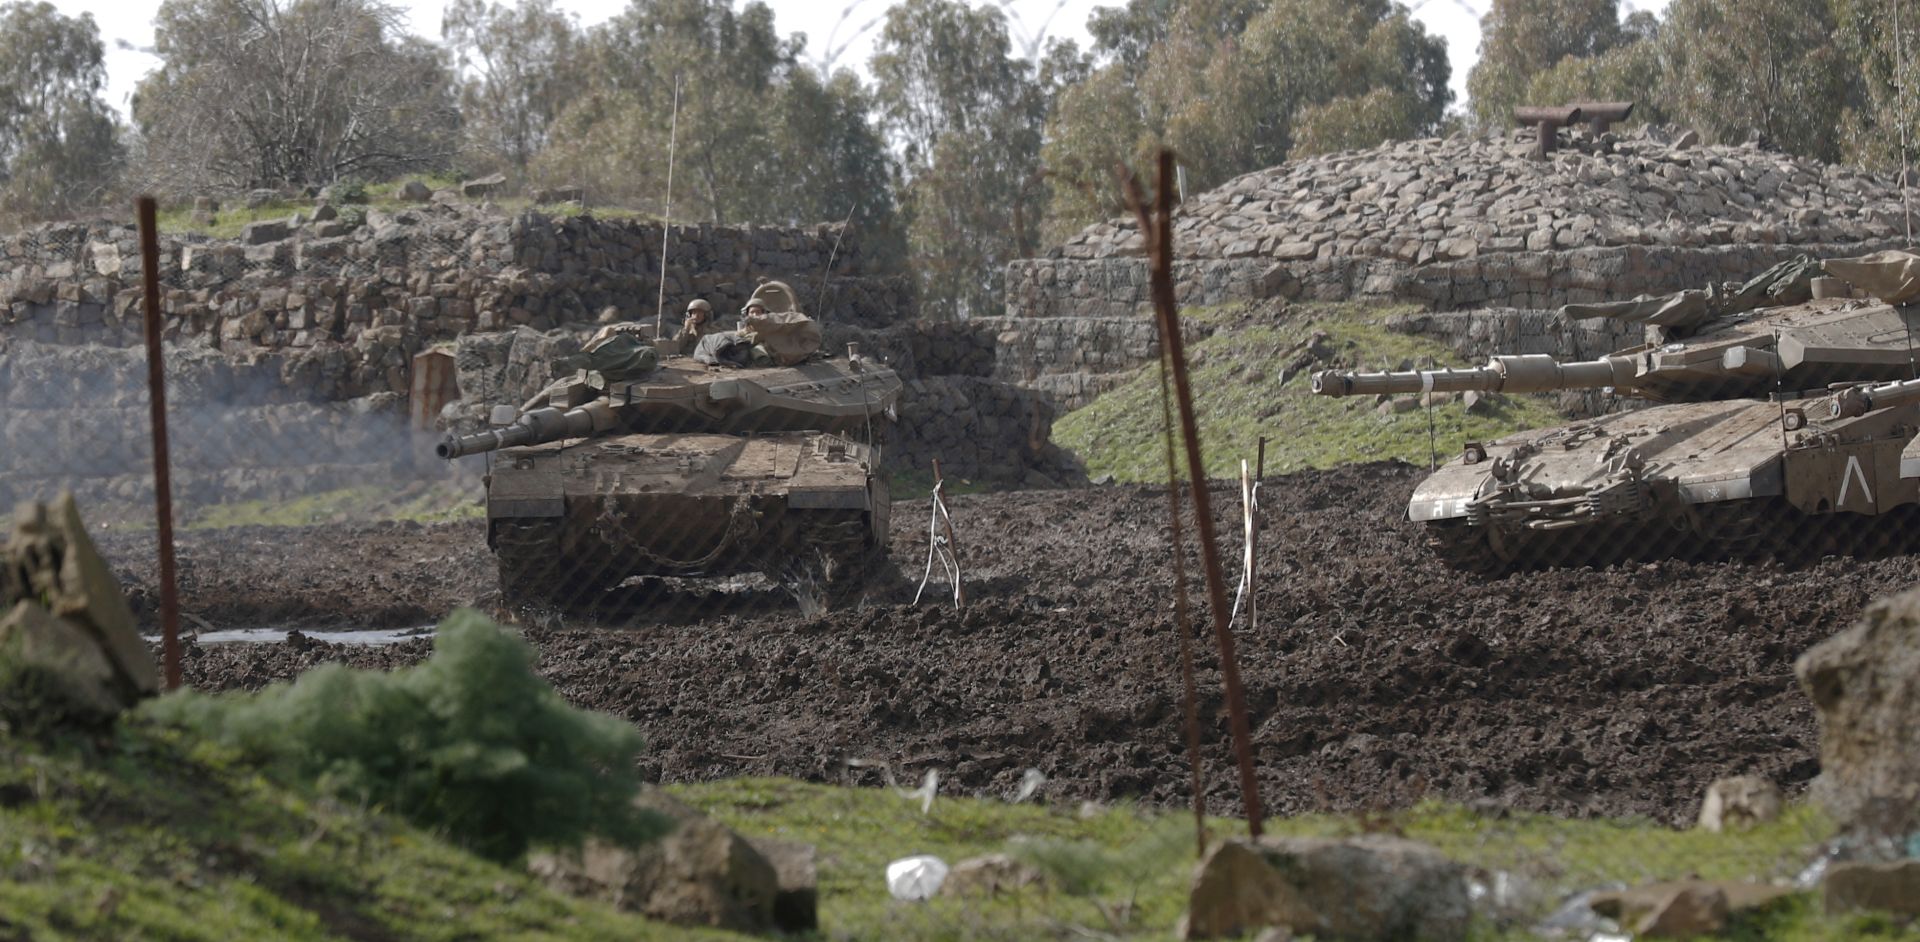 epa07364344 Israeli tanks patrol during training in the Golan Heights near the city of Quneitra on the Israeli-Syrian Border, 12 February 2019. According to media reports, Israeli army targeted Syrian lookout post overnight. The attack reportedly targeted a previously destroyed hospital and the tal-aderiya area near the city of Quneitra with tanks and artillery shells. Reports said two Iranian soldiers were killed from the attacks on Quneitra which Syria attributed to Israel.  EPA/ATEF SAFADI